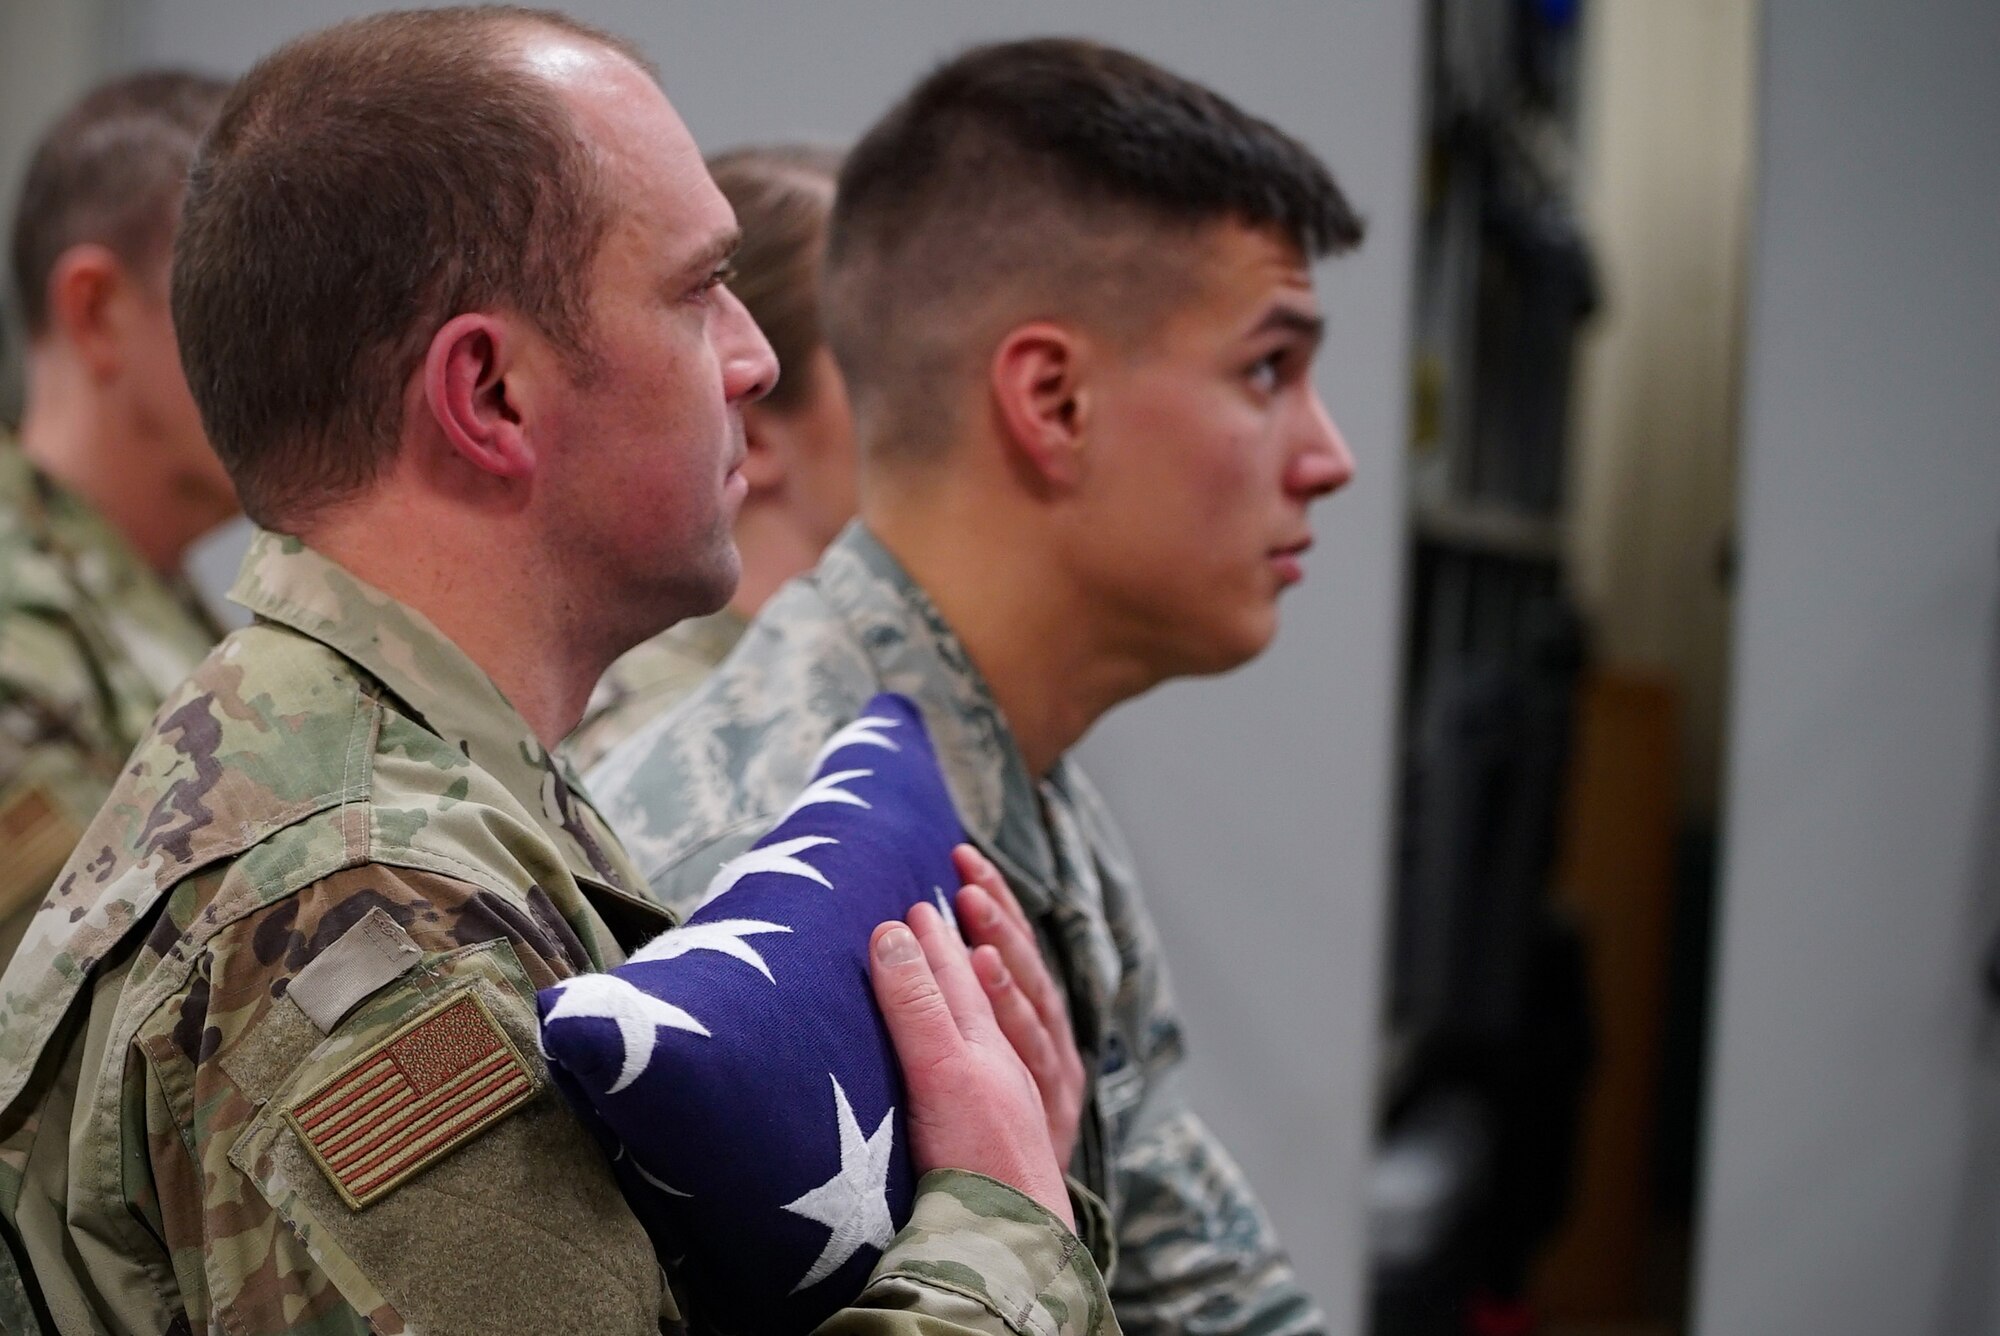 Staff Sgt. Sean King, 319th Security Forces Squadron military working dog handler, left, squeezes a U.S. flag to his chest during a memorial service for his partner, “Dex,” Dec. 20, 2019, on Grand Forks Air Force Base, North Dakota. King was Dex’s most recent handler, previously working alongside nine other defenders throughout his career as a narcotic detector dog. (U.S. Air Force photo by Senior Airman Elora J. Martinez)